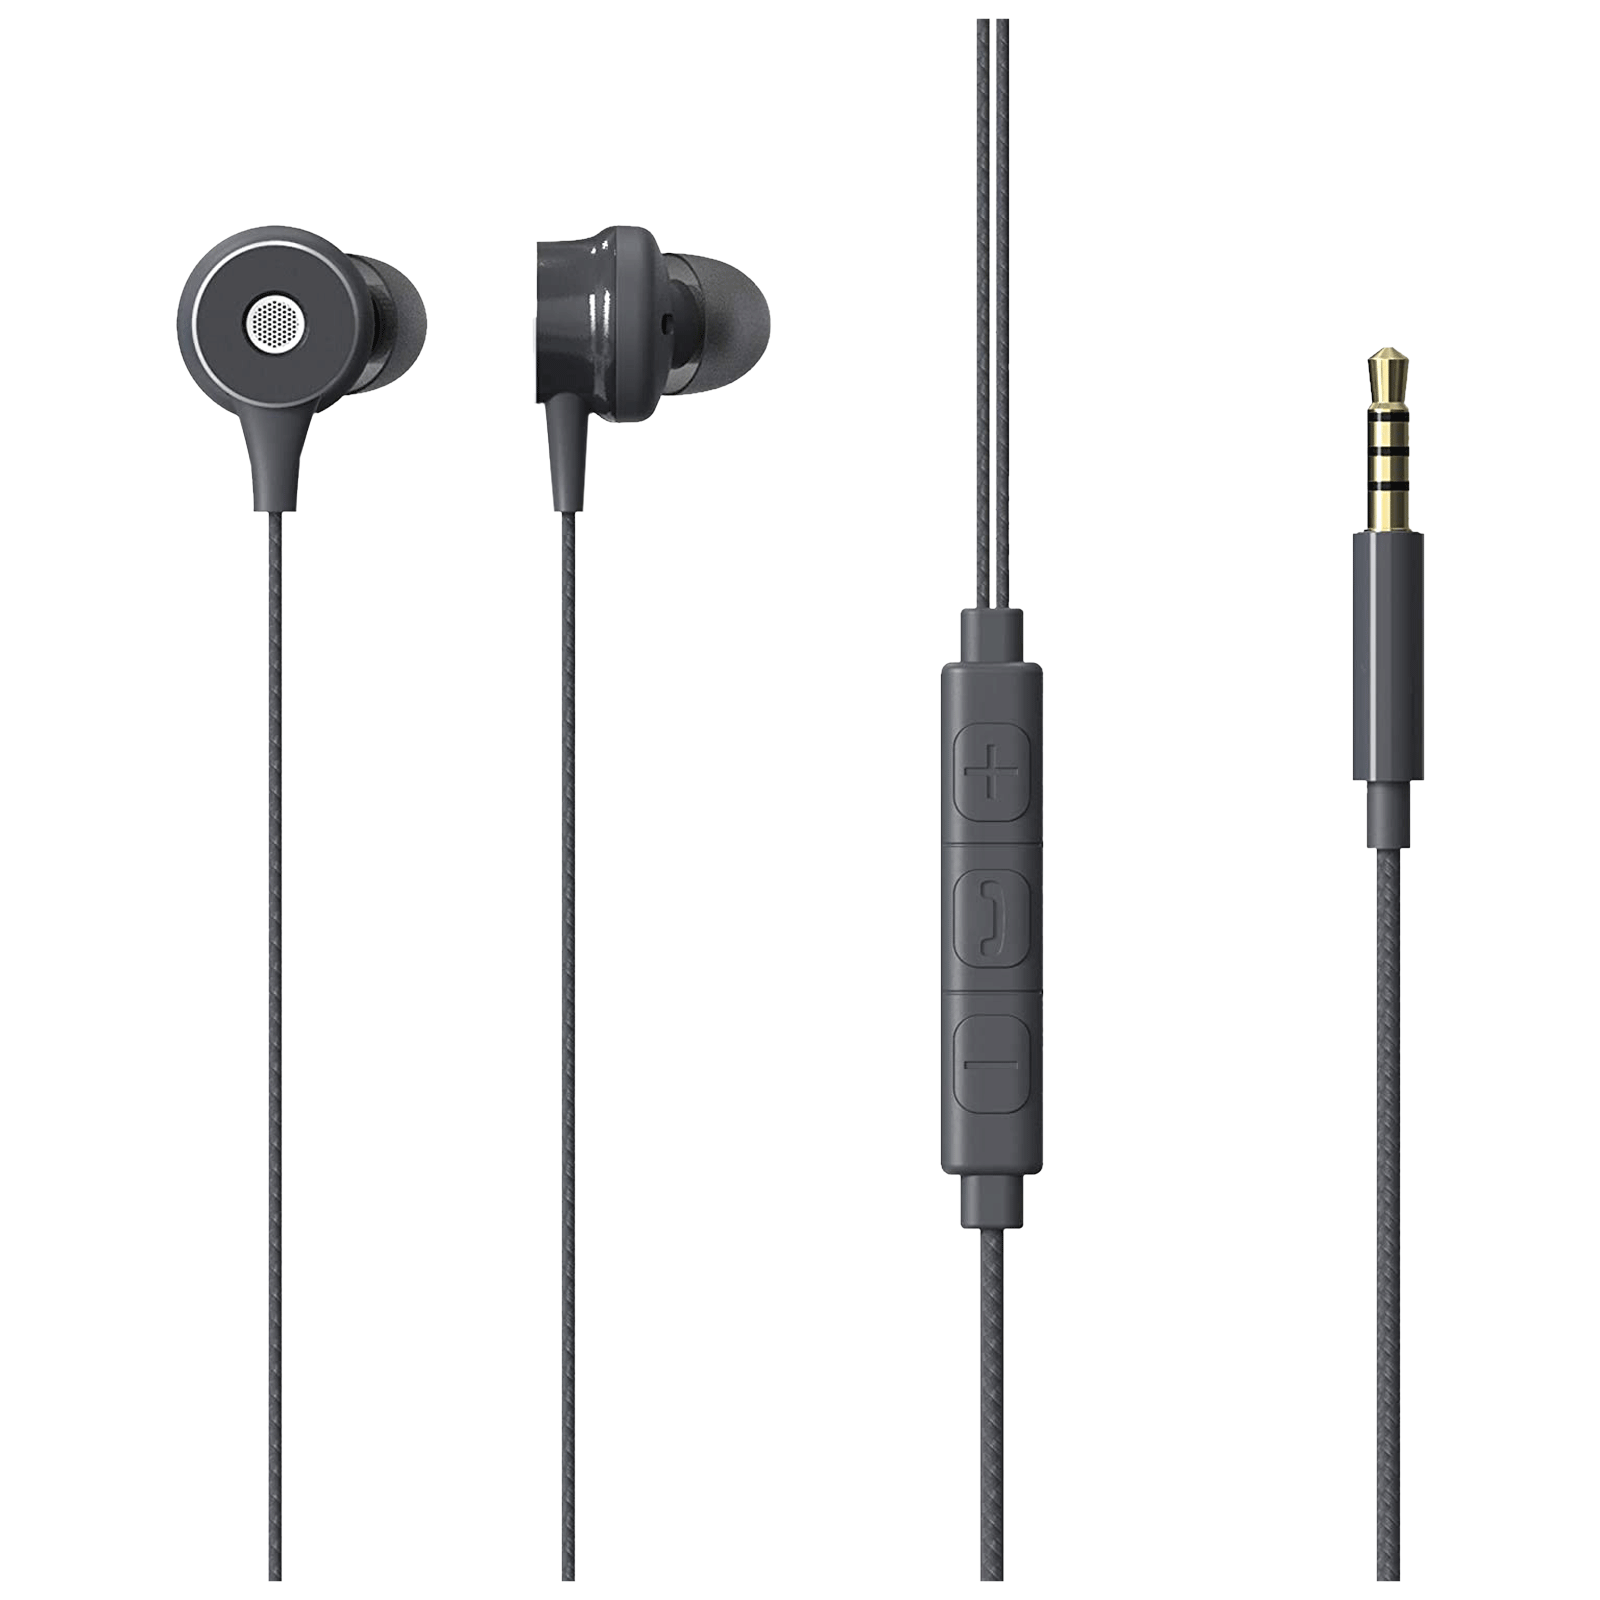 ZEBRONICS Buds 20 Wired Earphone with Mic (In Ear, Black)